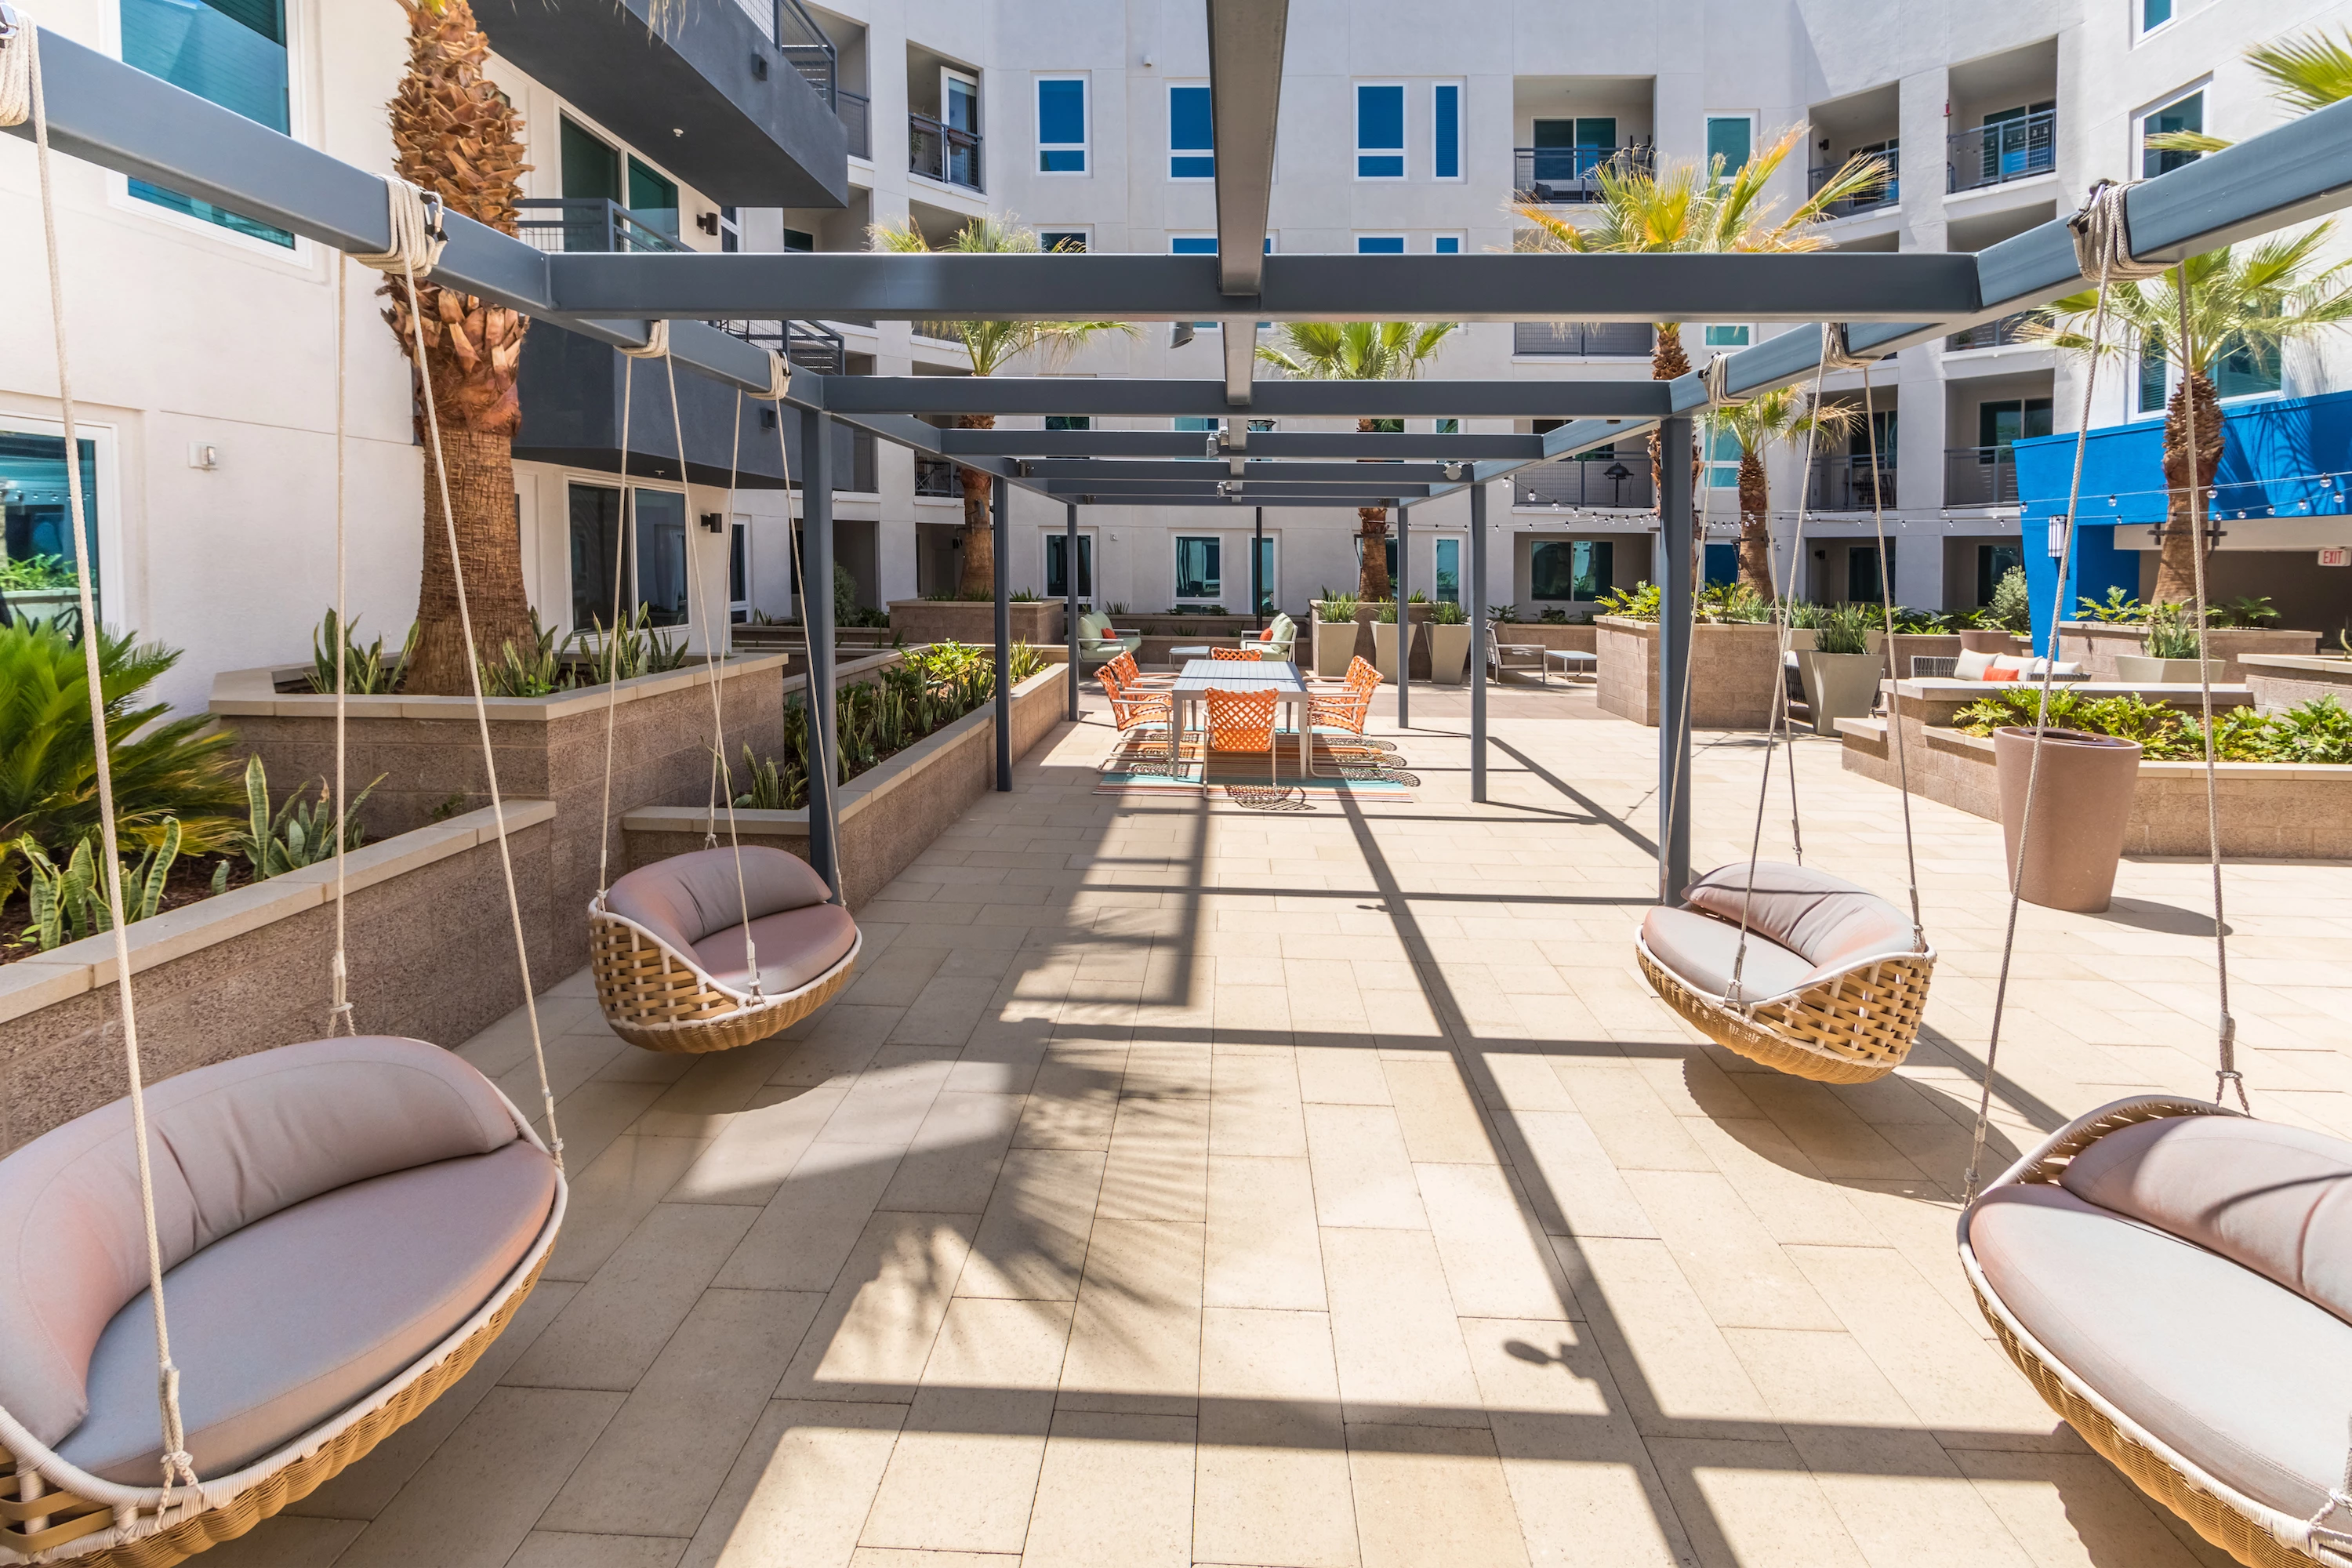 1241-13-exterior-courtyard-swing-seating-at-vela-on-ox-apartments-in-woodland-hills-c.jpg